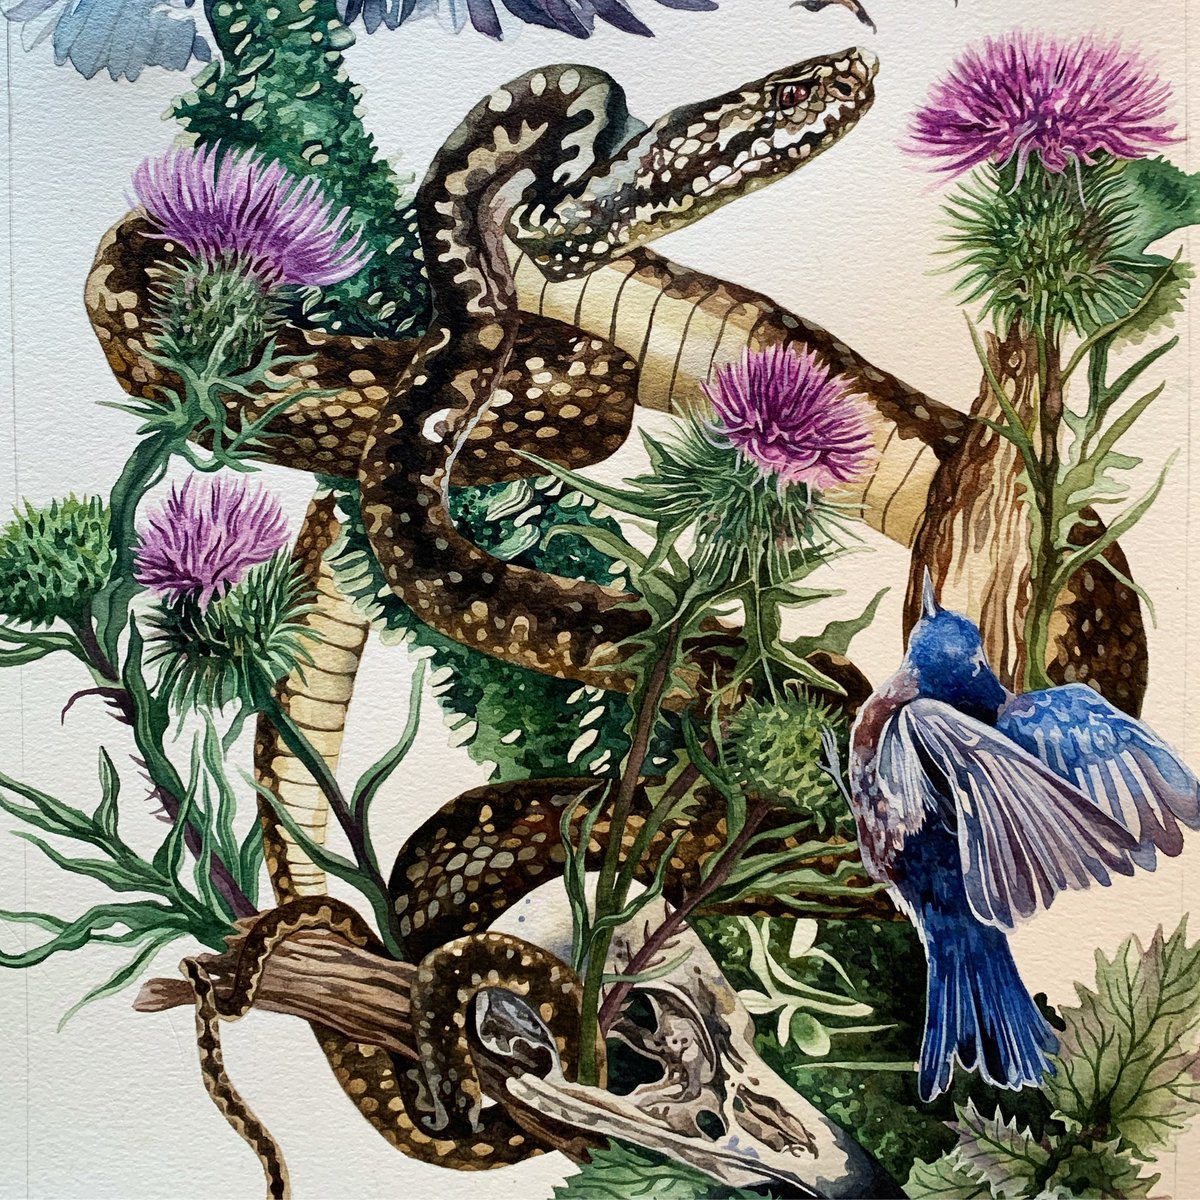 Adder in the thistles 🐍🐍 #watercolour #snakepainting #watercolor #womensart #wildlifeart